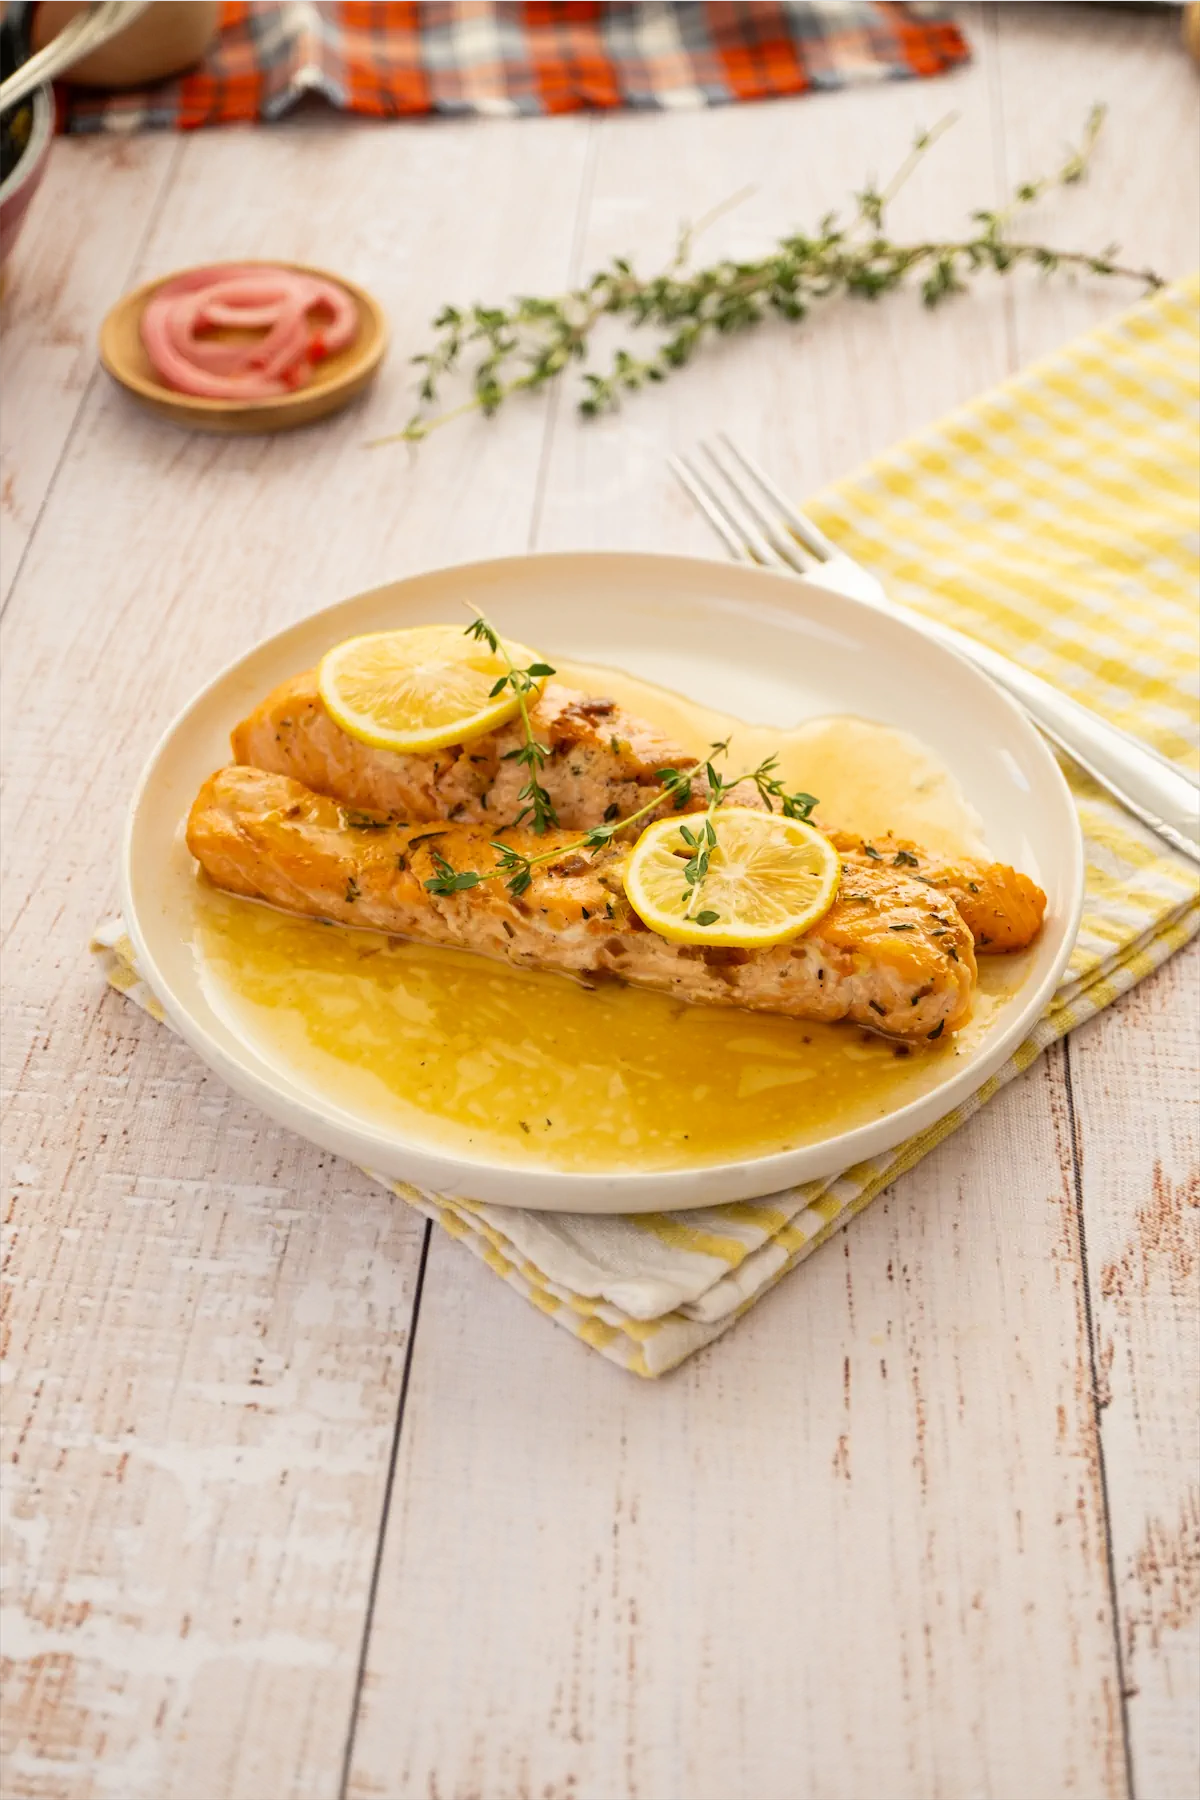 Salmon recipe with lemon slices and herbs served on a plate.